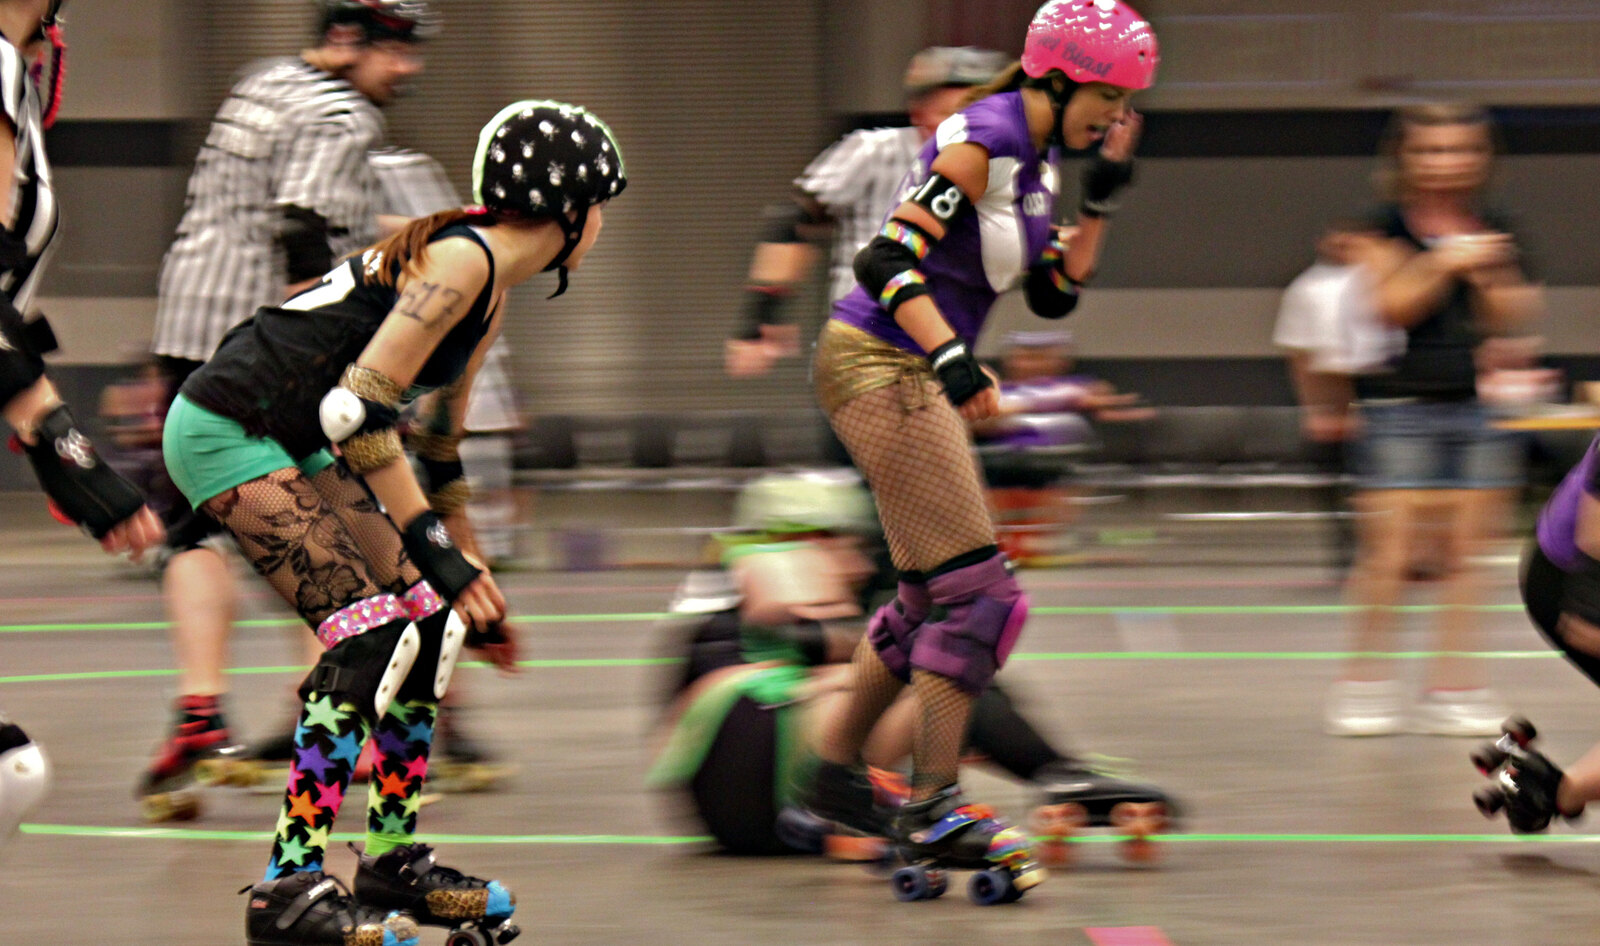 You Can Live Out Your Vegan Roller Derby Dreams in Illinois Next Month